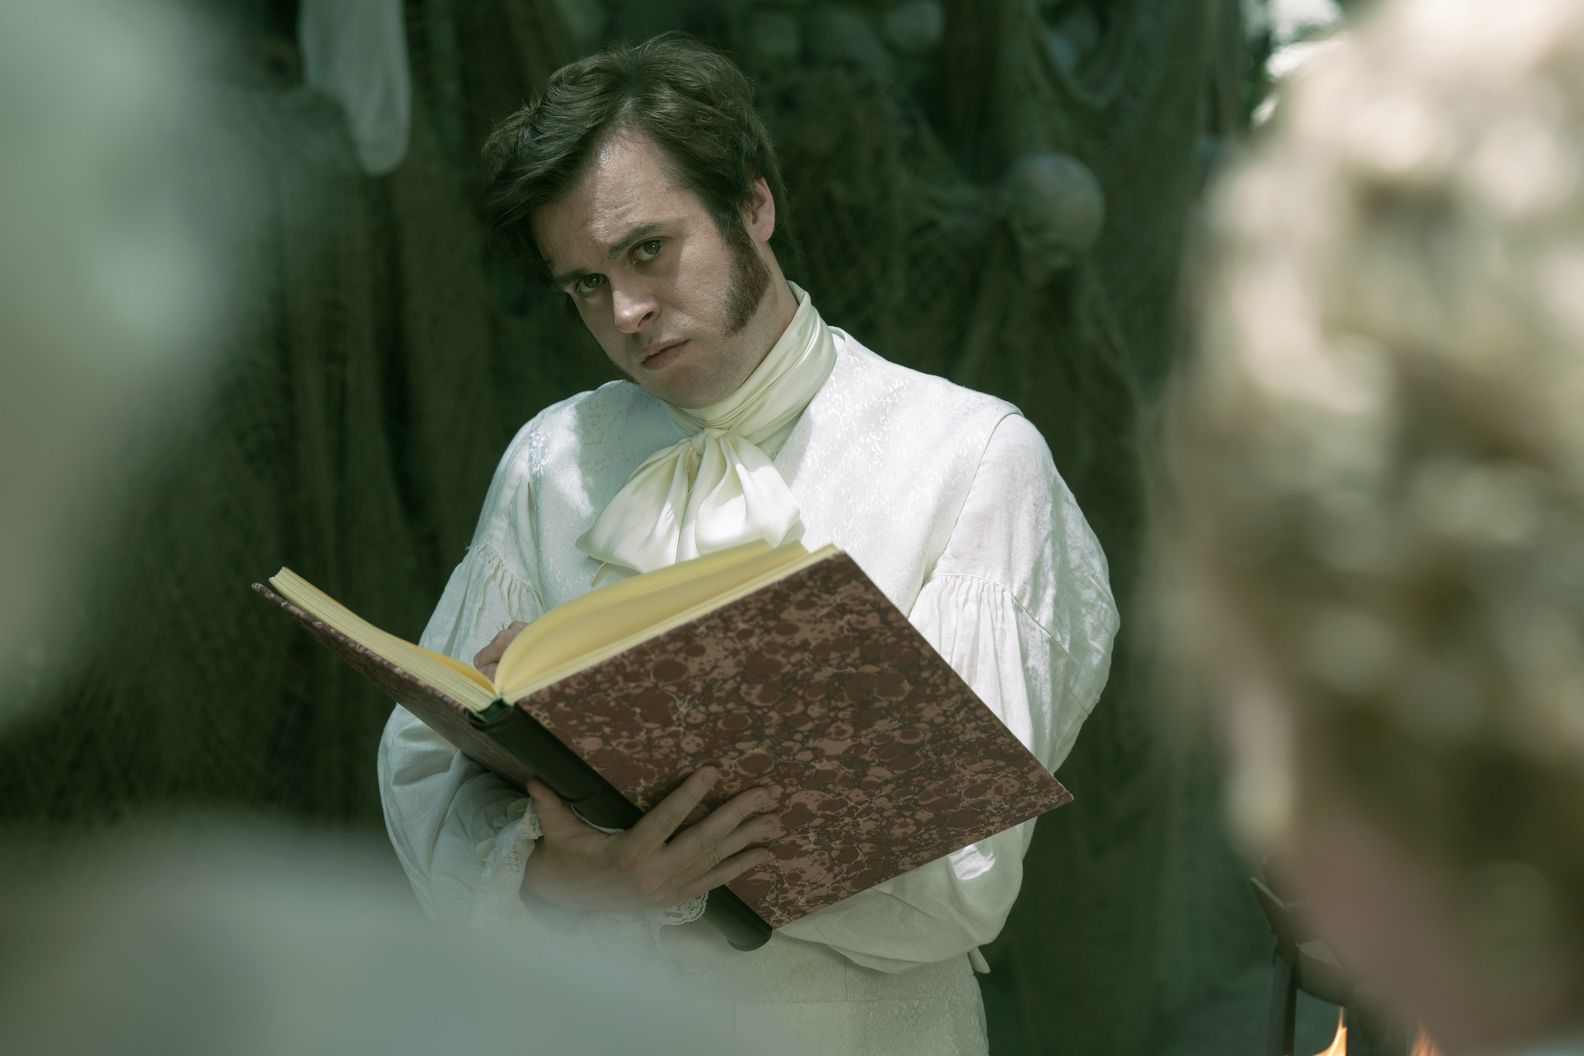 Nathan Foad as Lucius in Season 1 of "Our Flag Means Death." (Photo credit: Aaron Epstein/HBO Max)